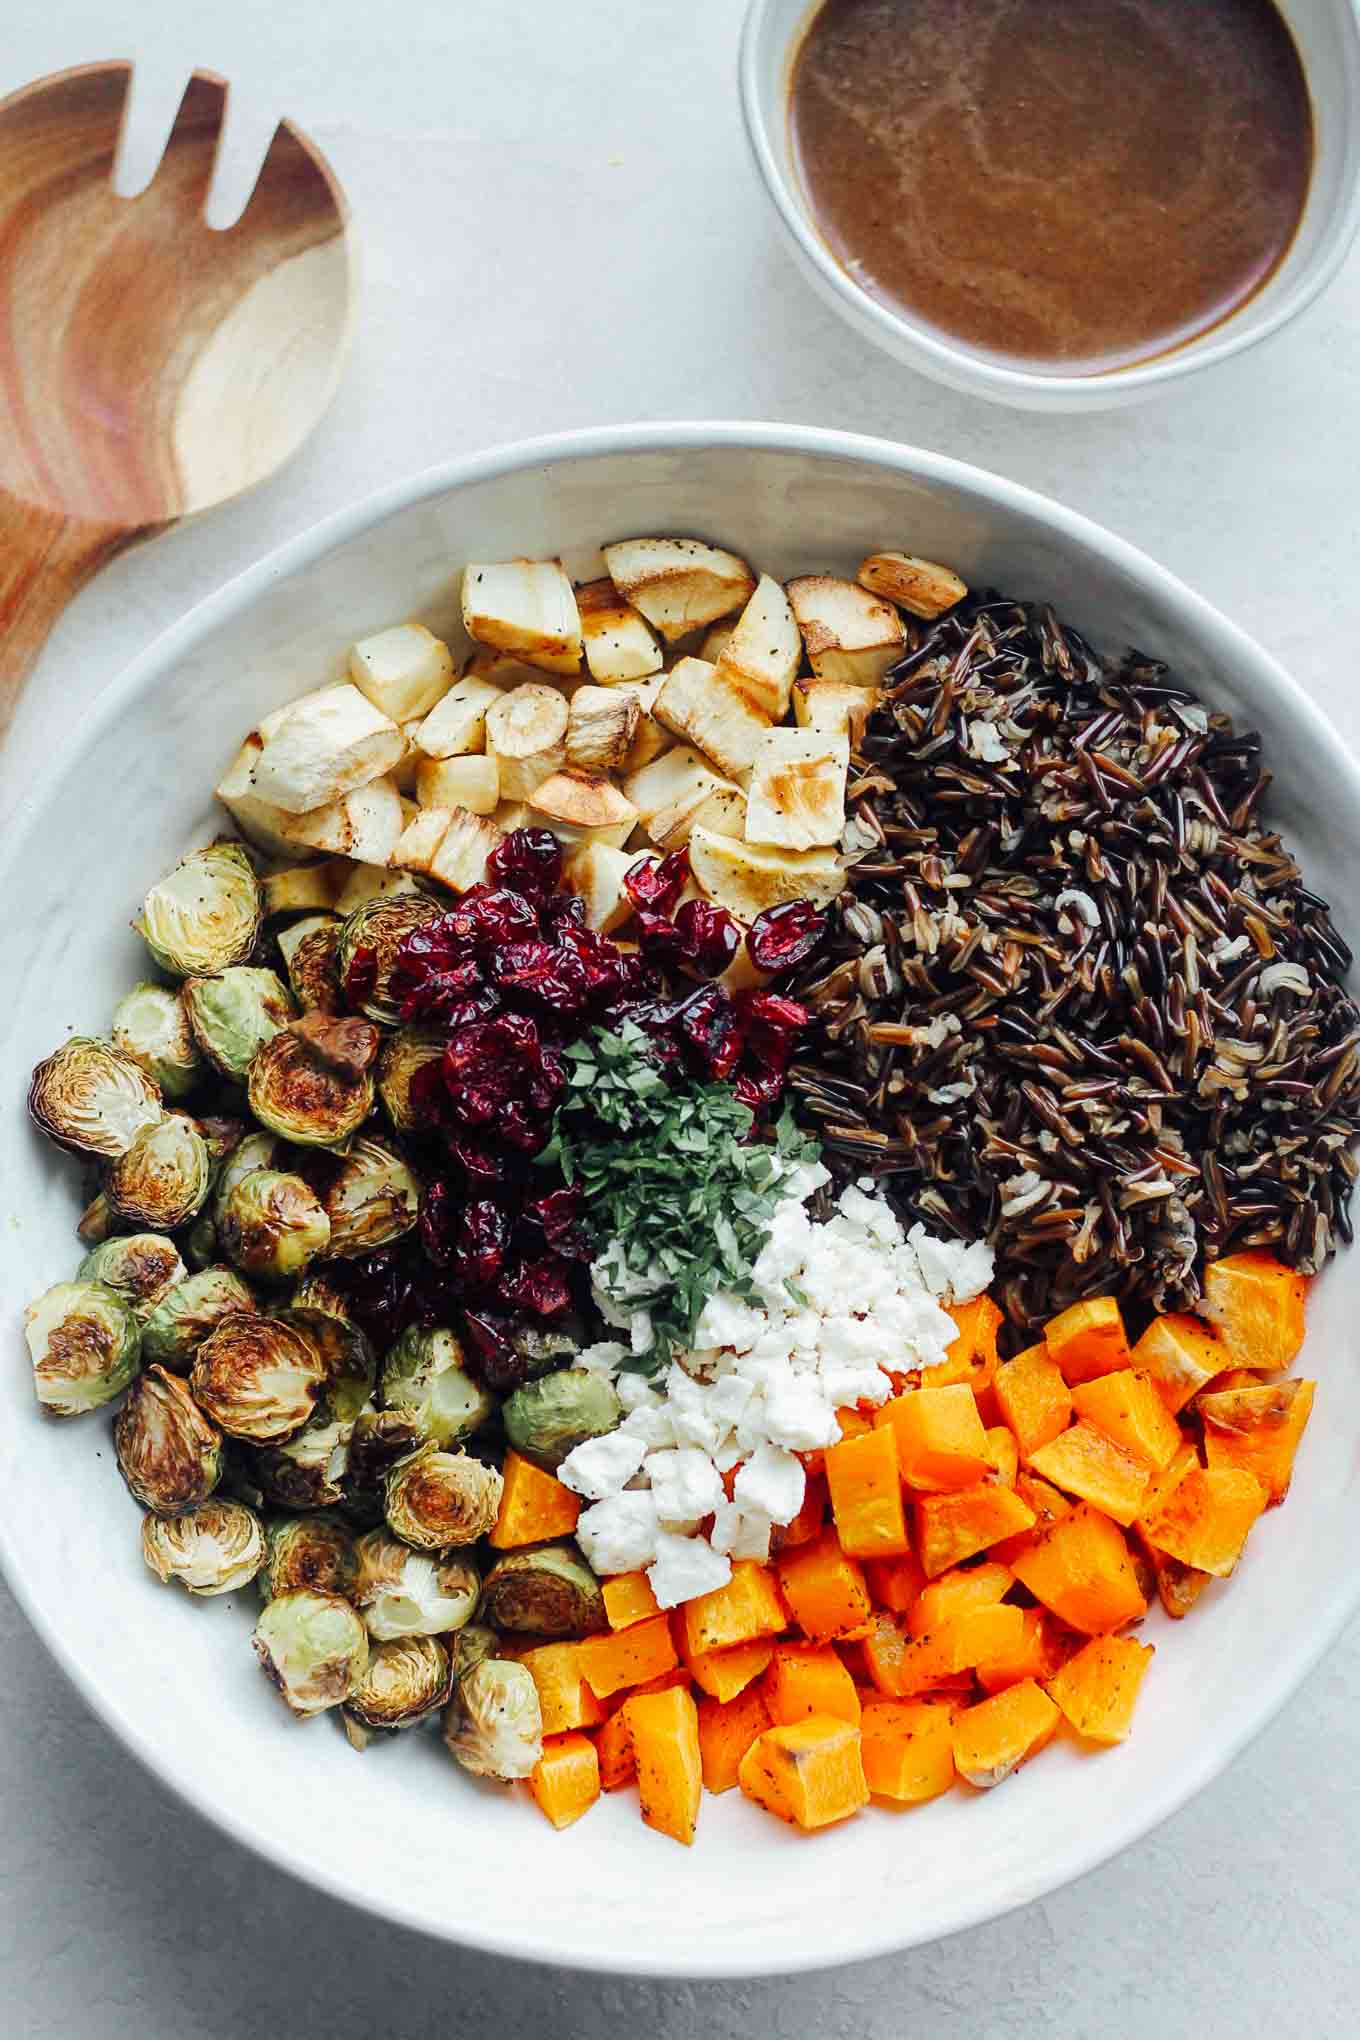 An overhead view of each ingredient in the bowl before tossing with dressing